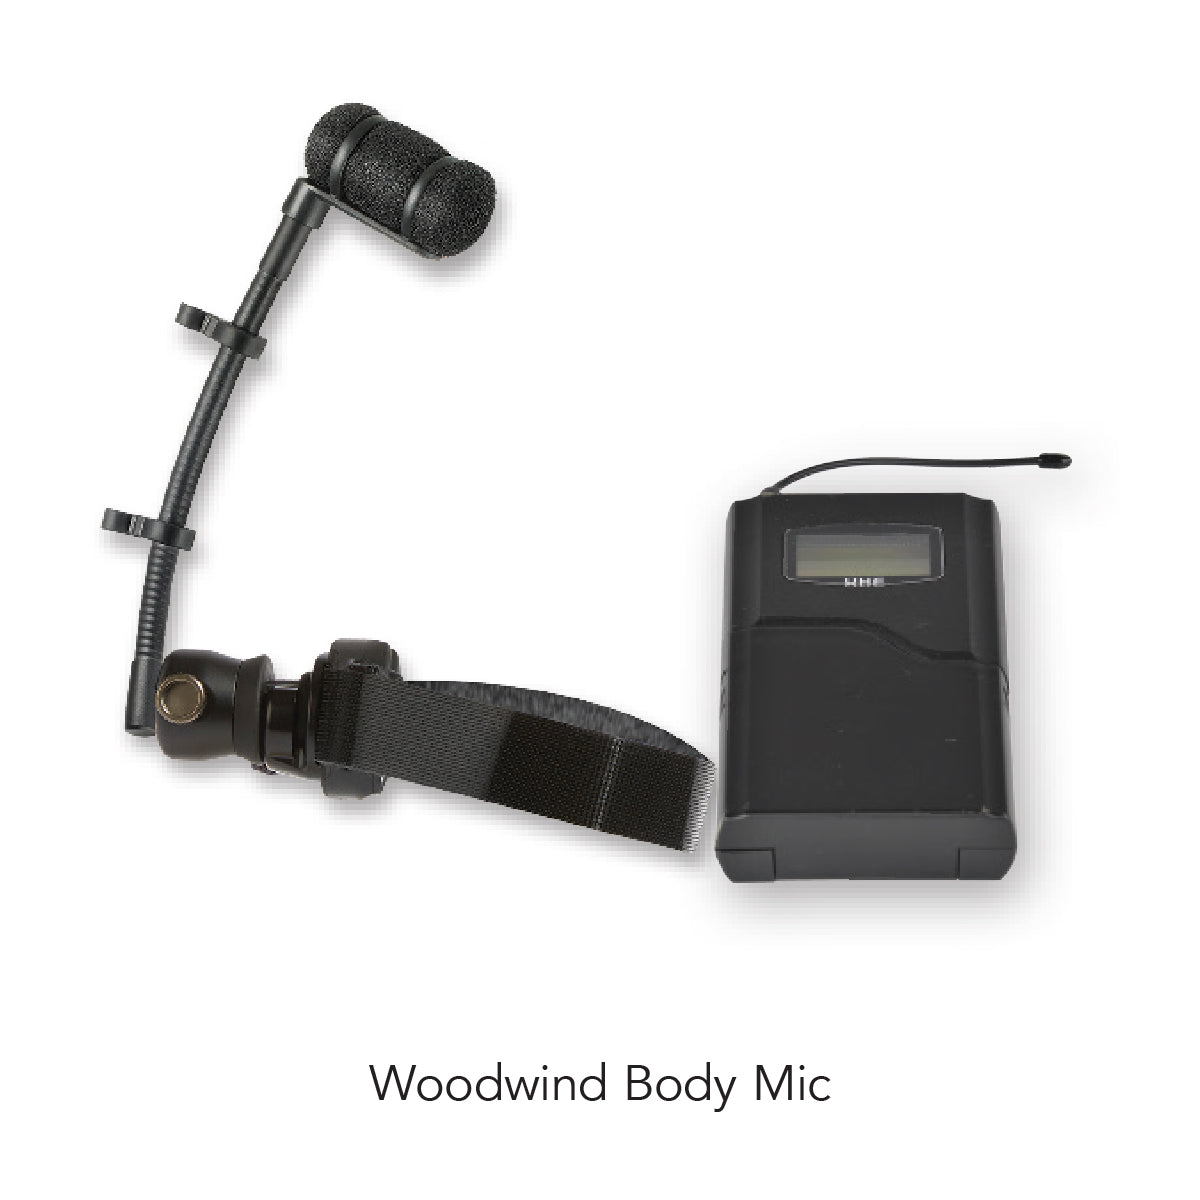 McCormick's Quad Wireless Microphone System